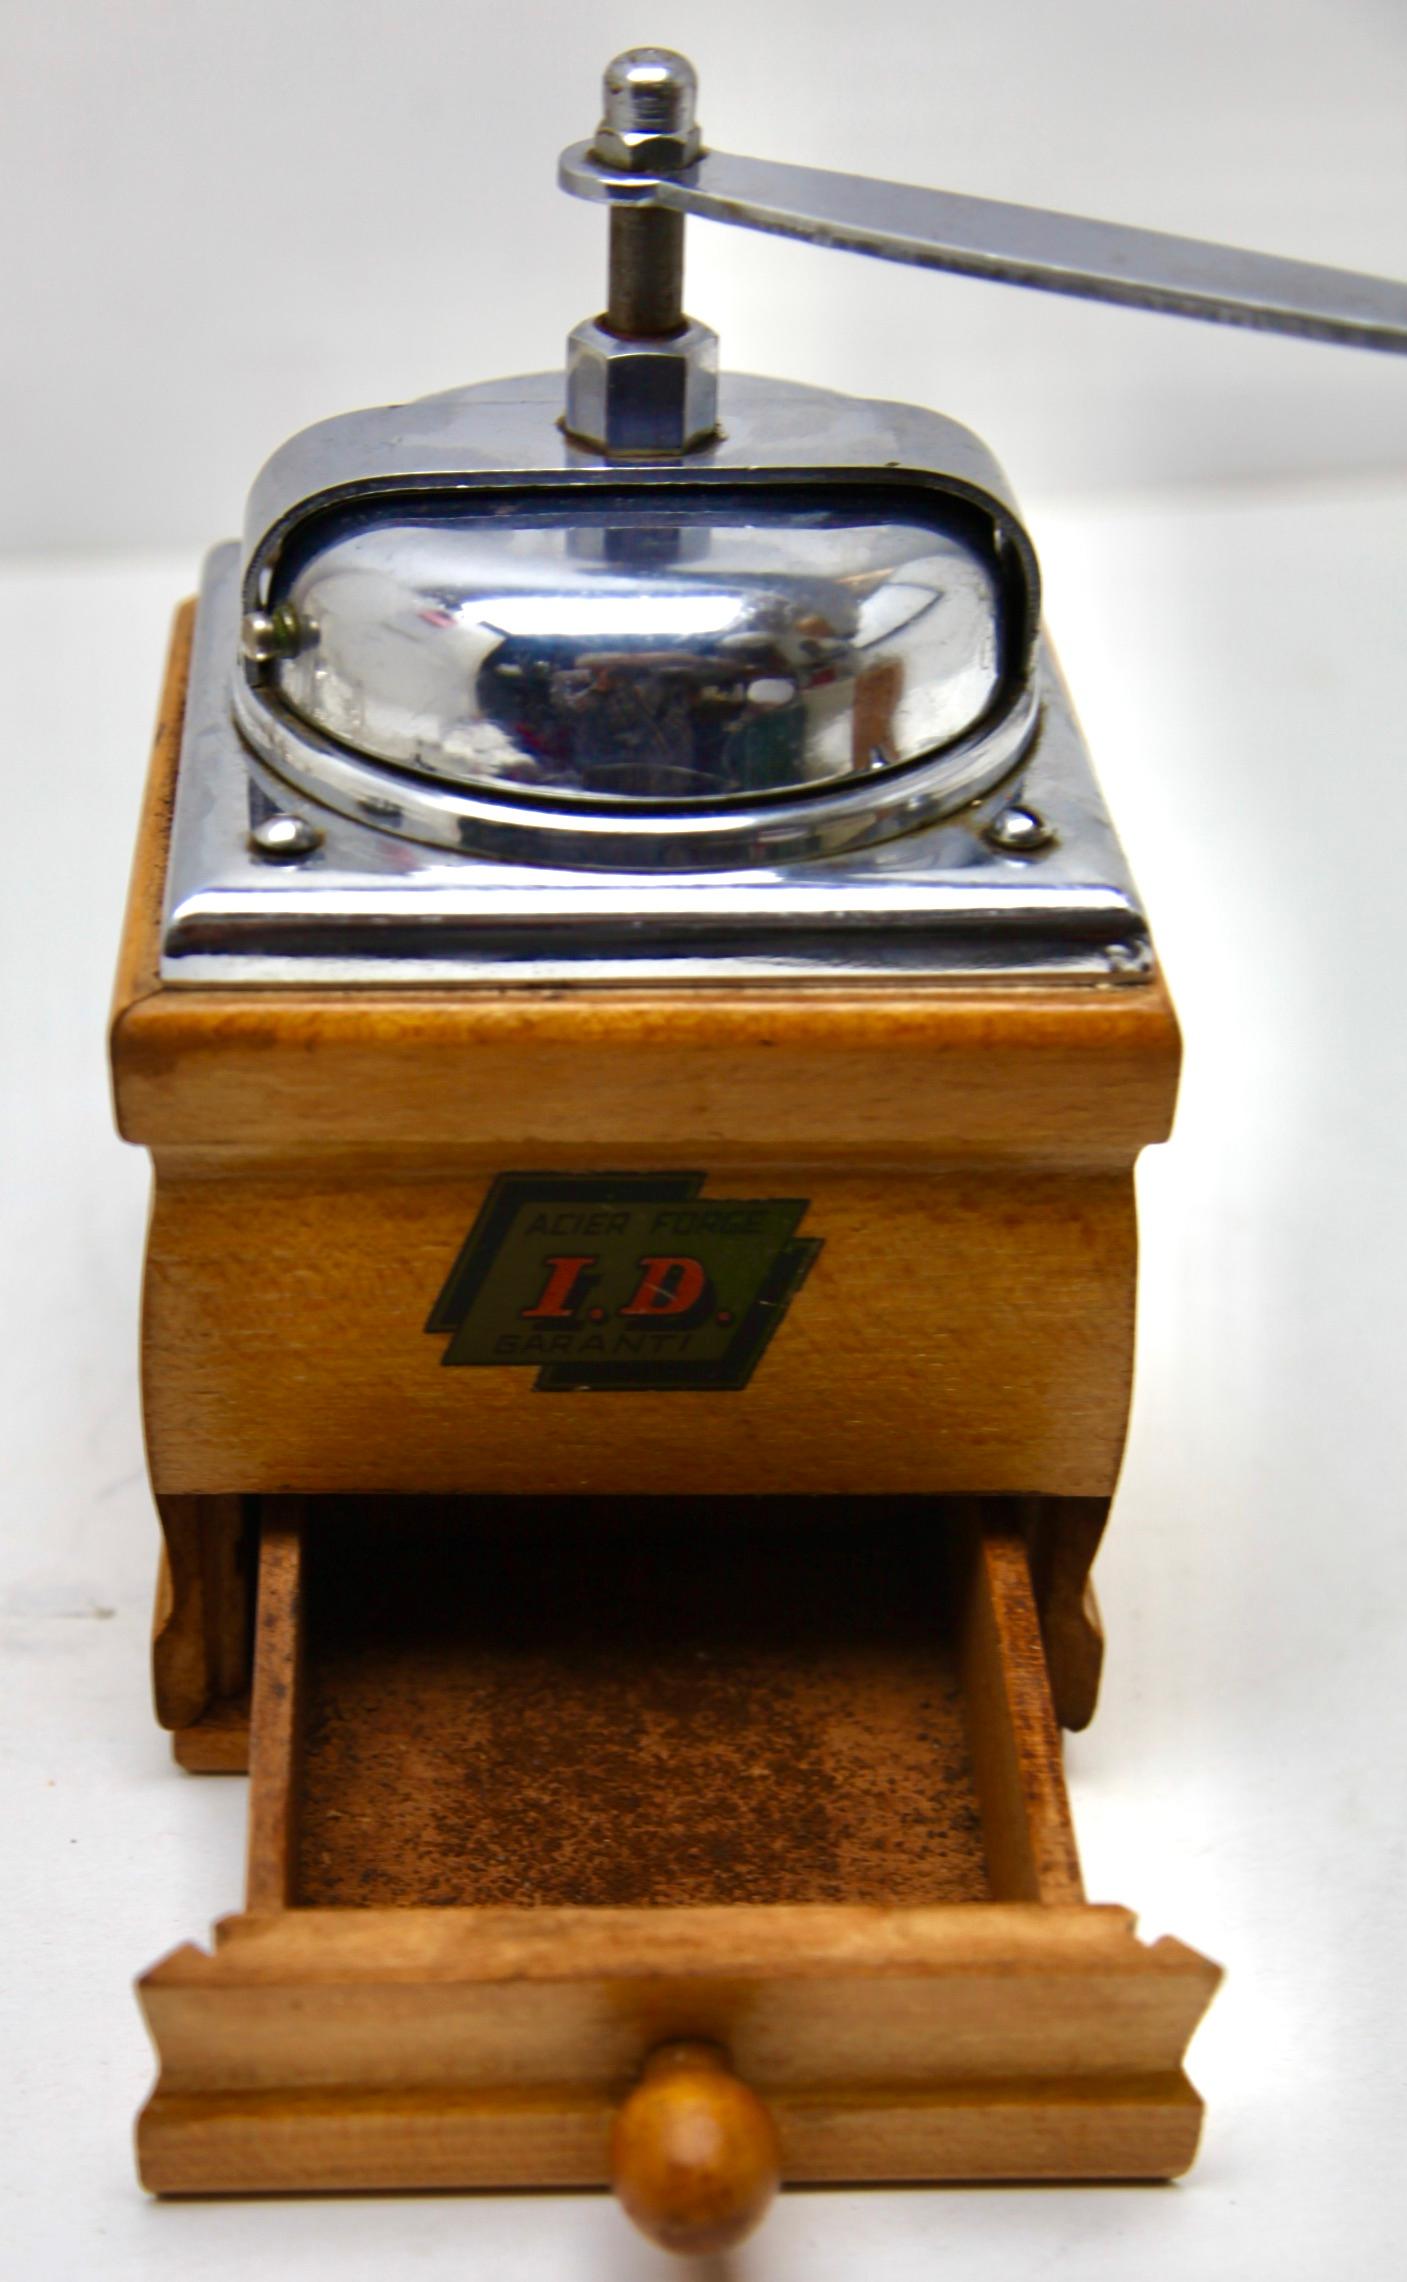 Mid-Century Modern Vintage Coffee Grinder I.D. 1940s-1950s Germany, Retro Kitchen For Sale